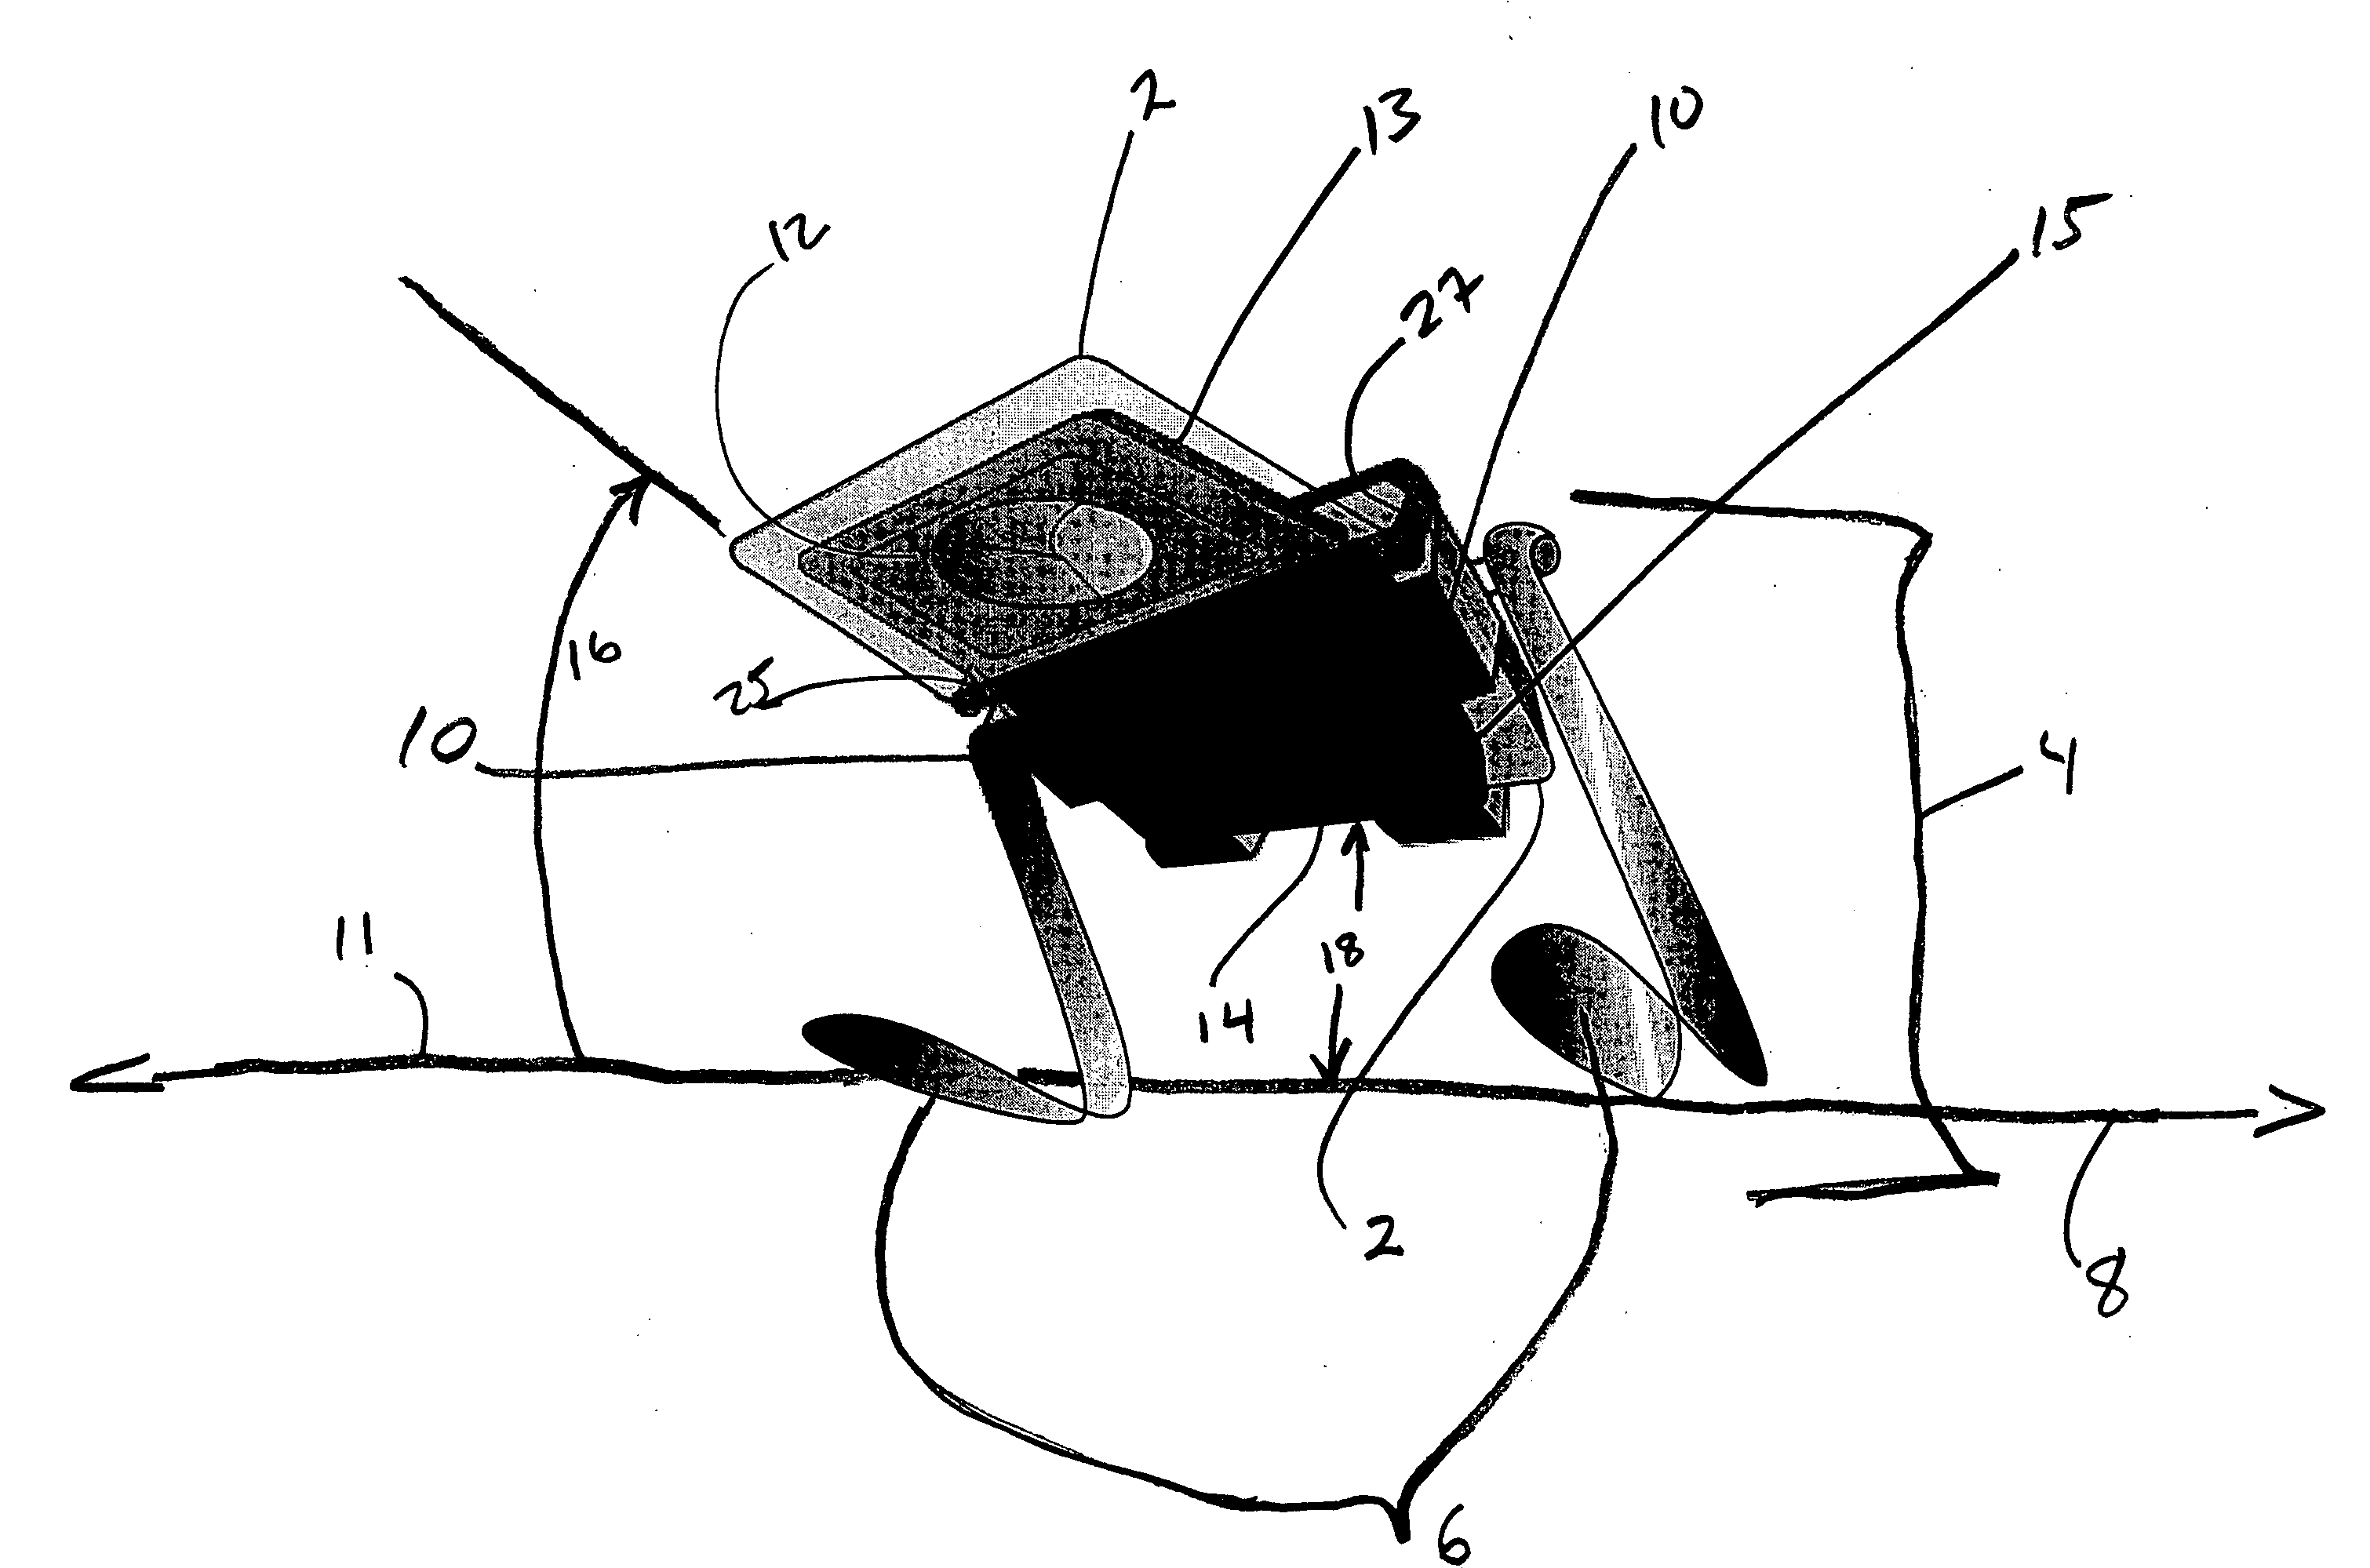 Device for holding a portable computer for operation in a supine position